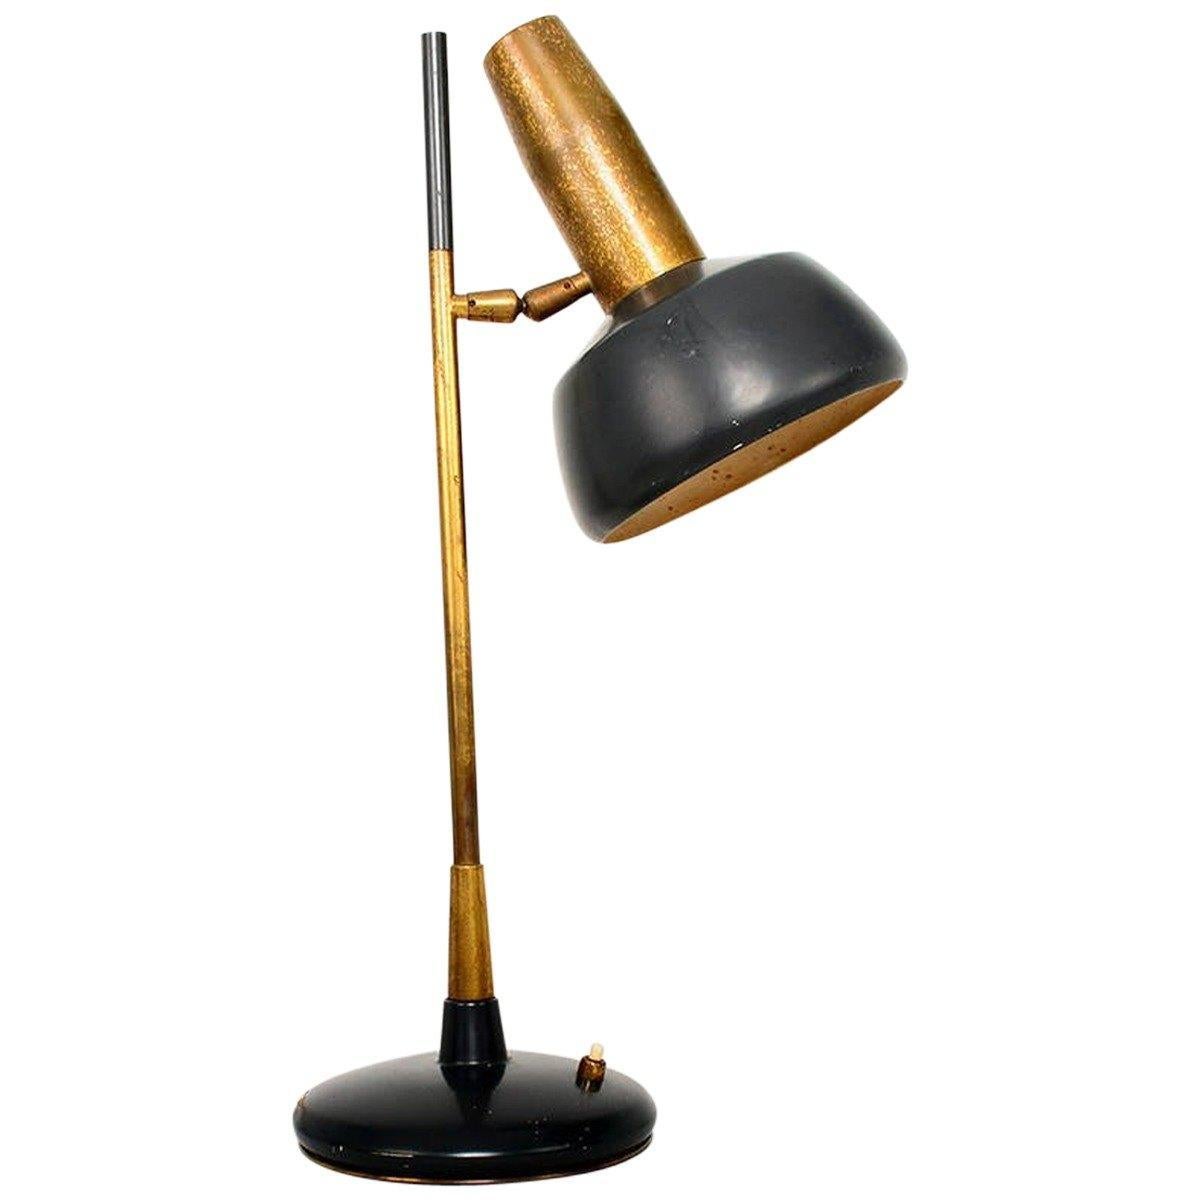 For your pleasure: a vintage desk lamp by Oscar Torlasco for Lumi, Milano. Dimensions: H 21 in. x W 6.5 in. x D 9 in. Original unrestored vintage finish and condition. Review images.